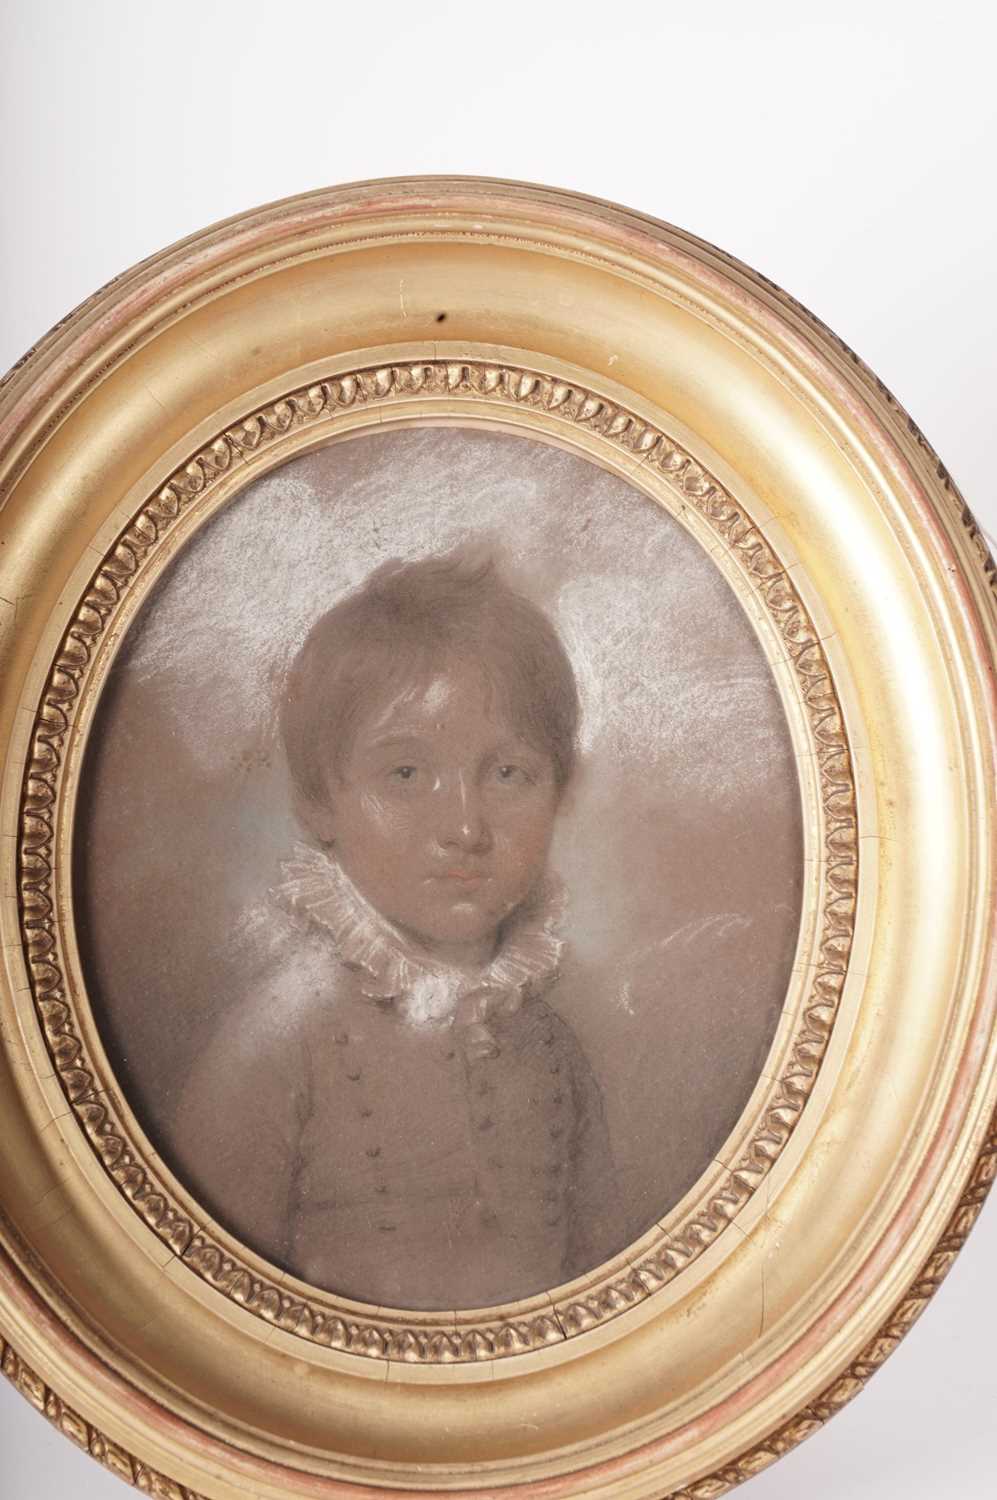 Late 18th Century British School - Portrait of a Young Boy Called George Richmond | pastel - Image 7 of 7